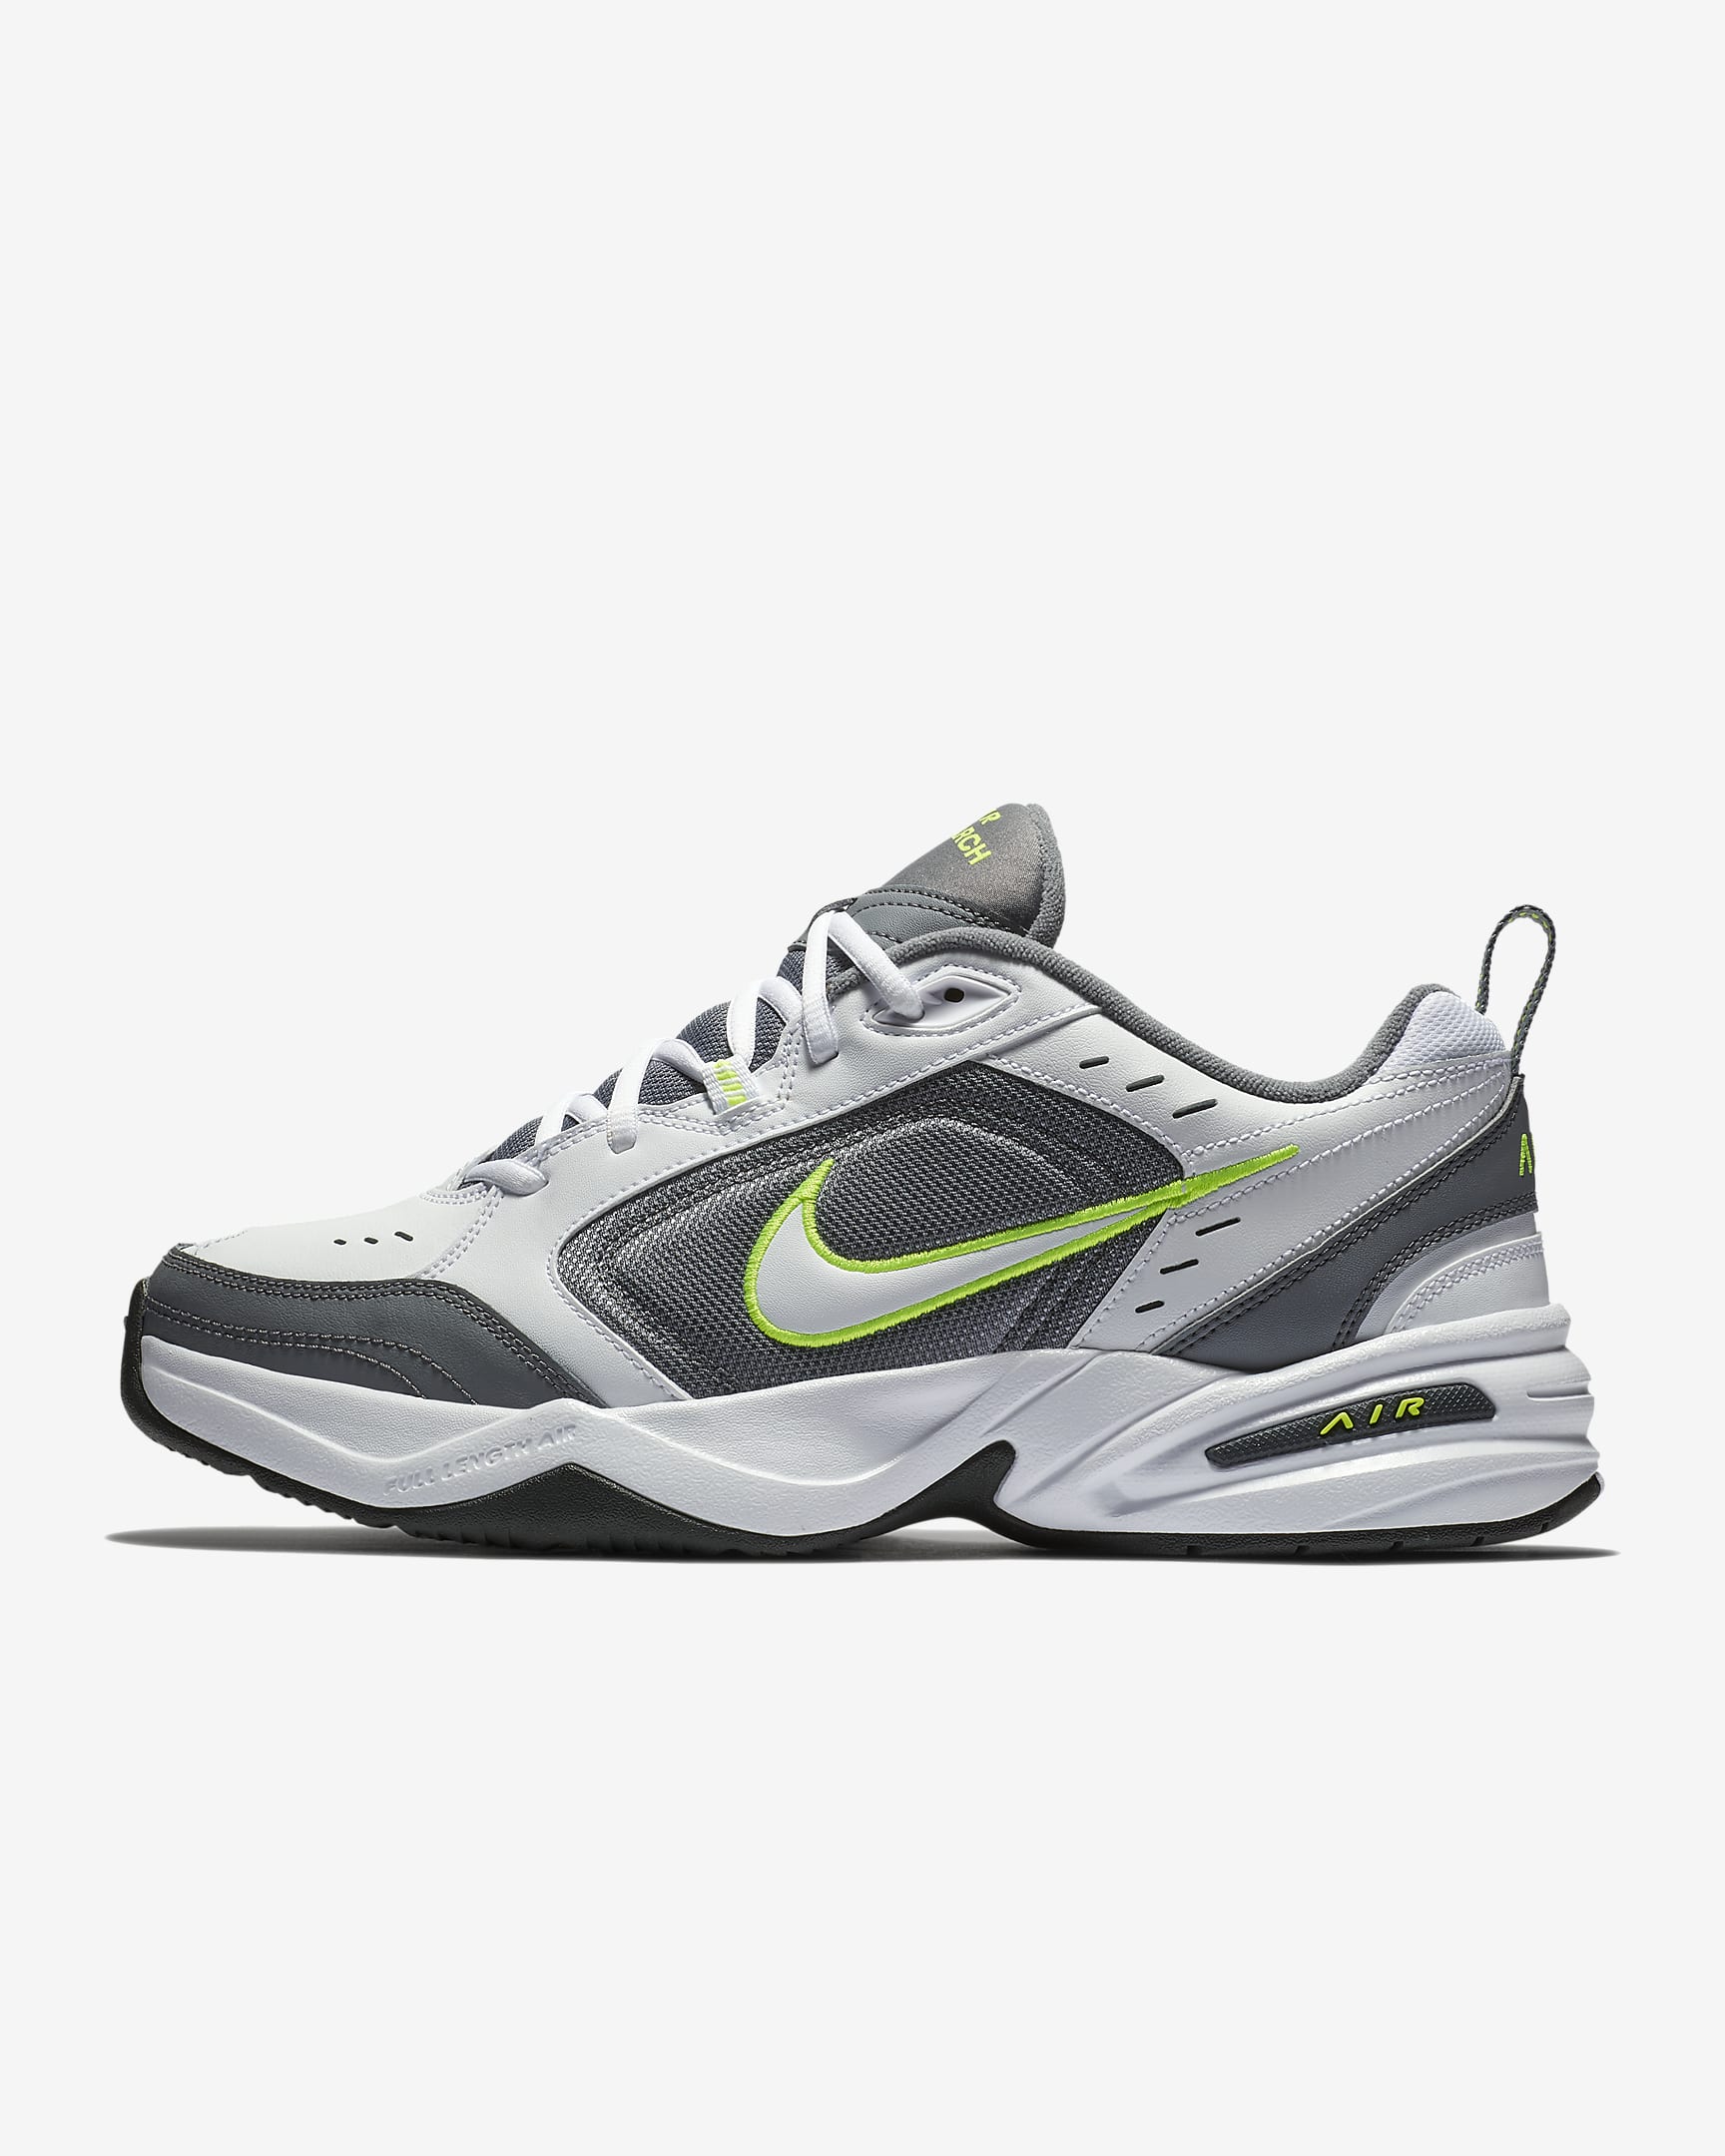 Nike Air Monarch IV Men's Workout Shoes - White/Cool Grey/Anthracite/White